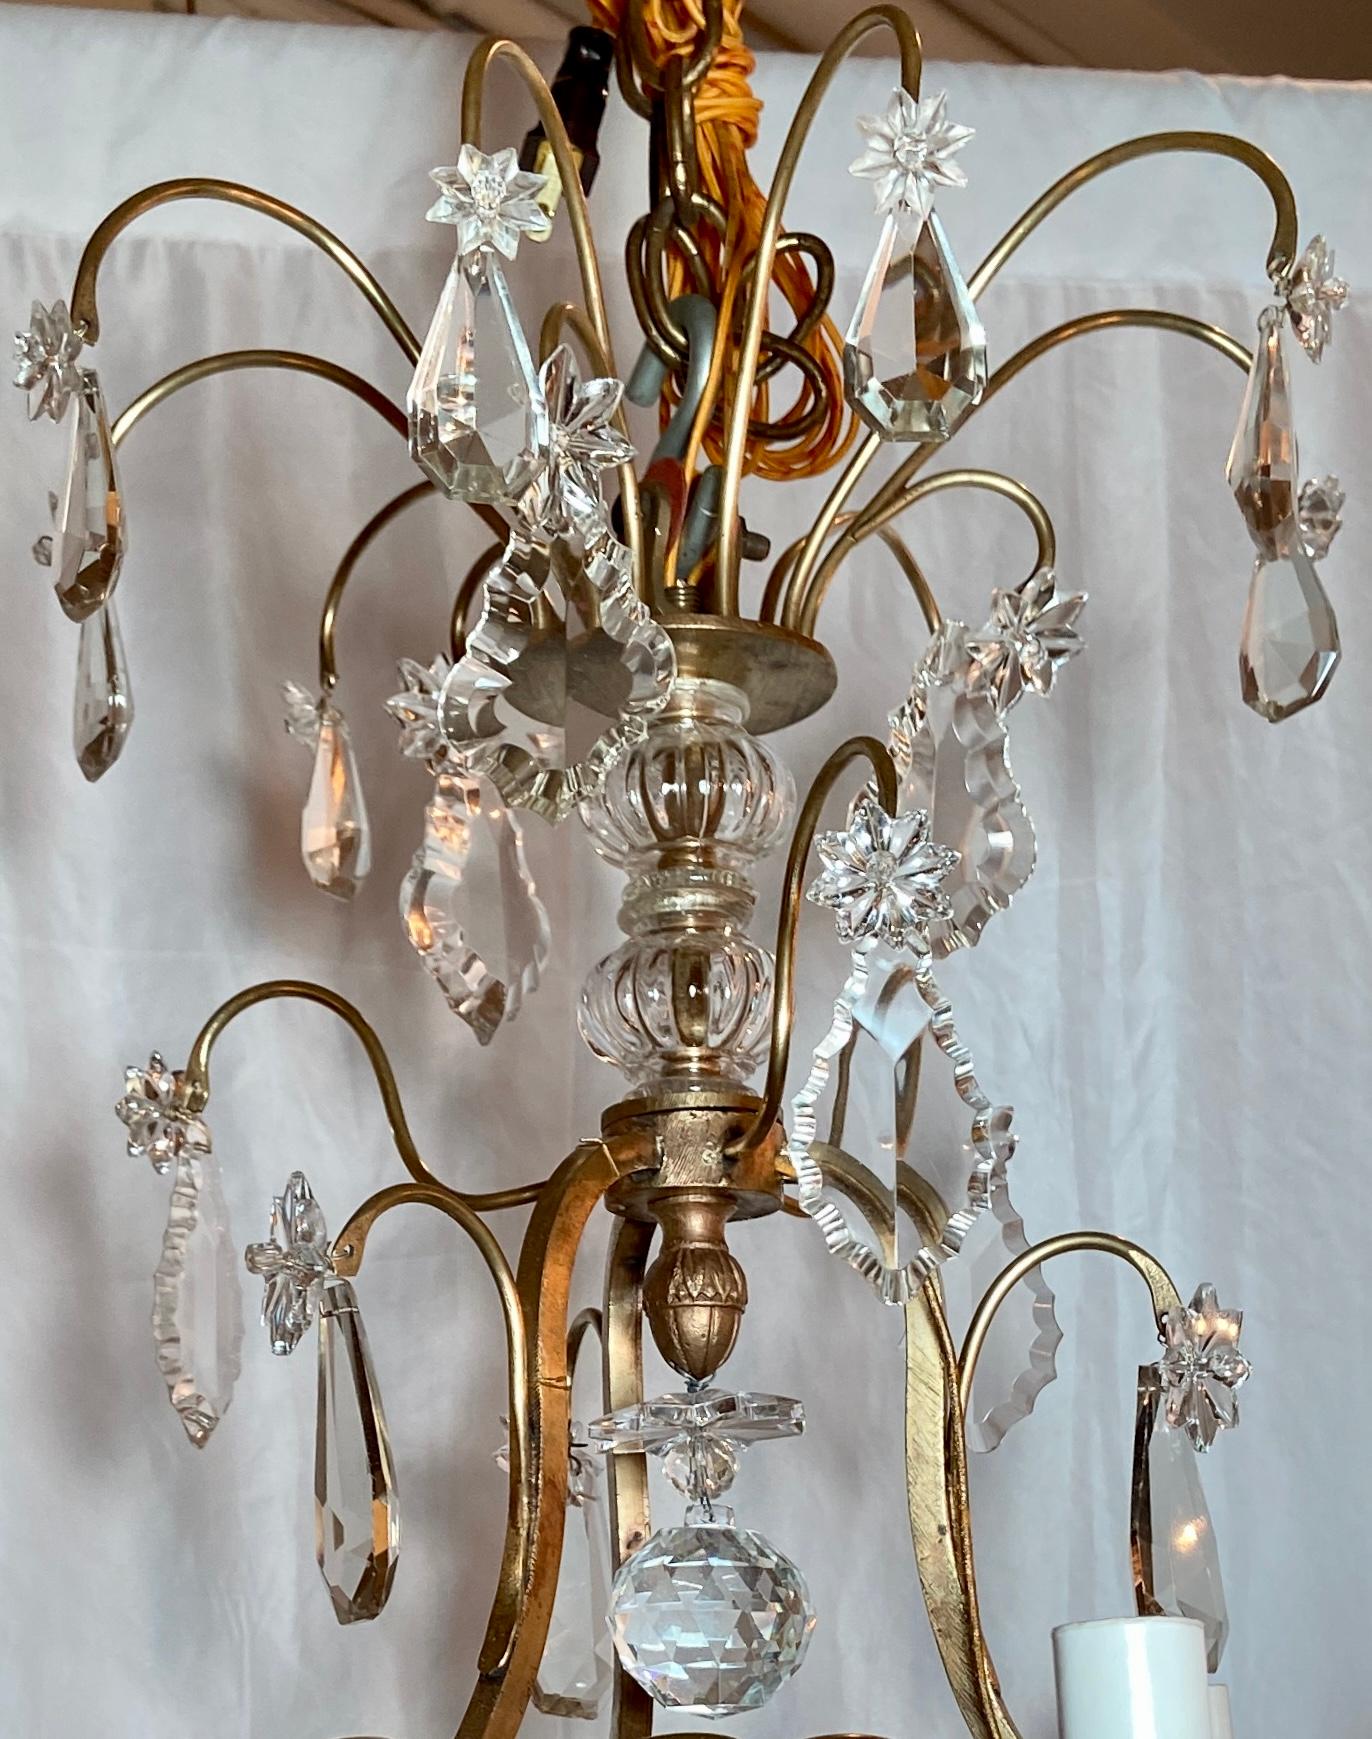 Antique French gold bronze and crystal chandelier, circa 1890.
This fixture has 6 lights and its openwork allows you to see the pretty form of the bronze. A nicely sized piece that will work in a variety of settings and still provide plenty of